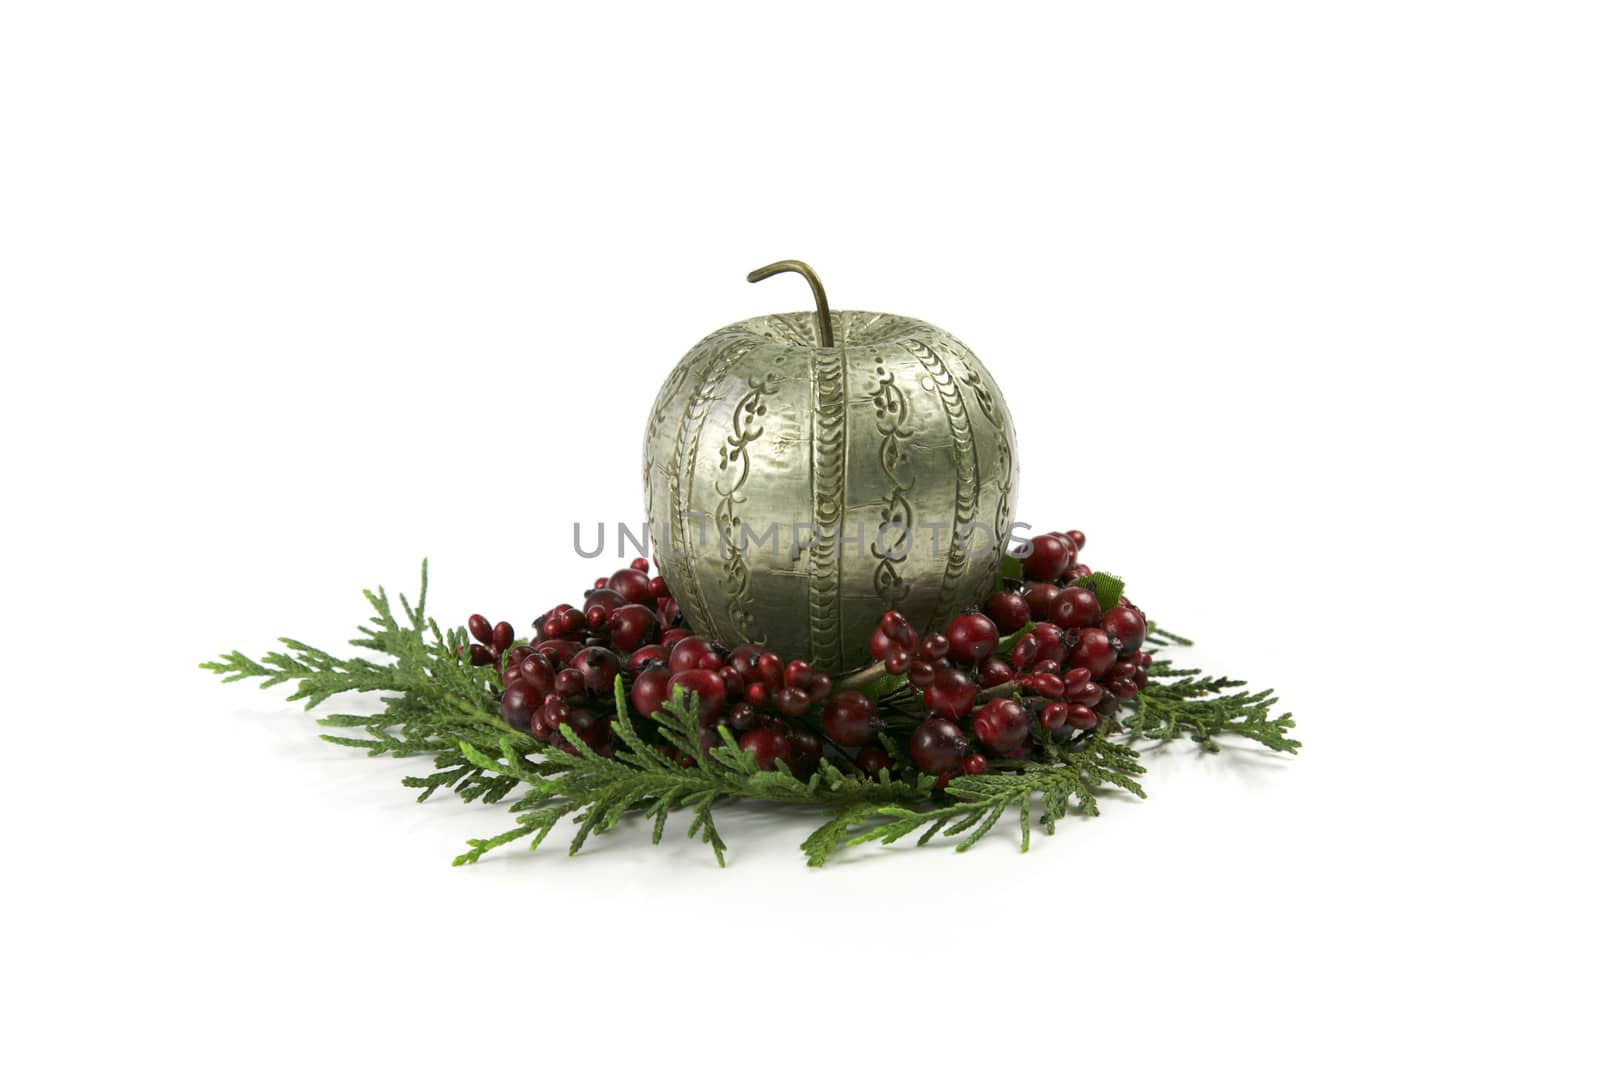 Christmas Apple Made of Silver on top of red Berries and the Christmas Tree, Seasonal Holidays